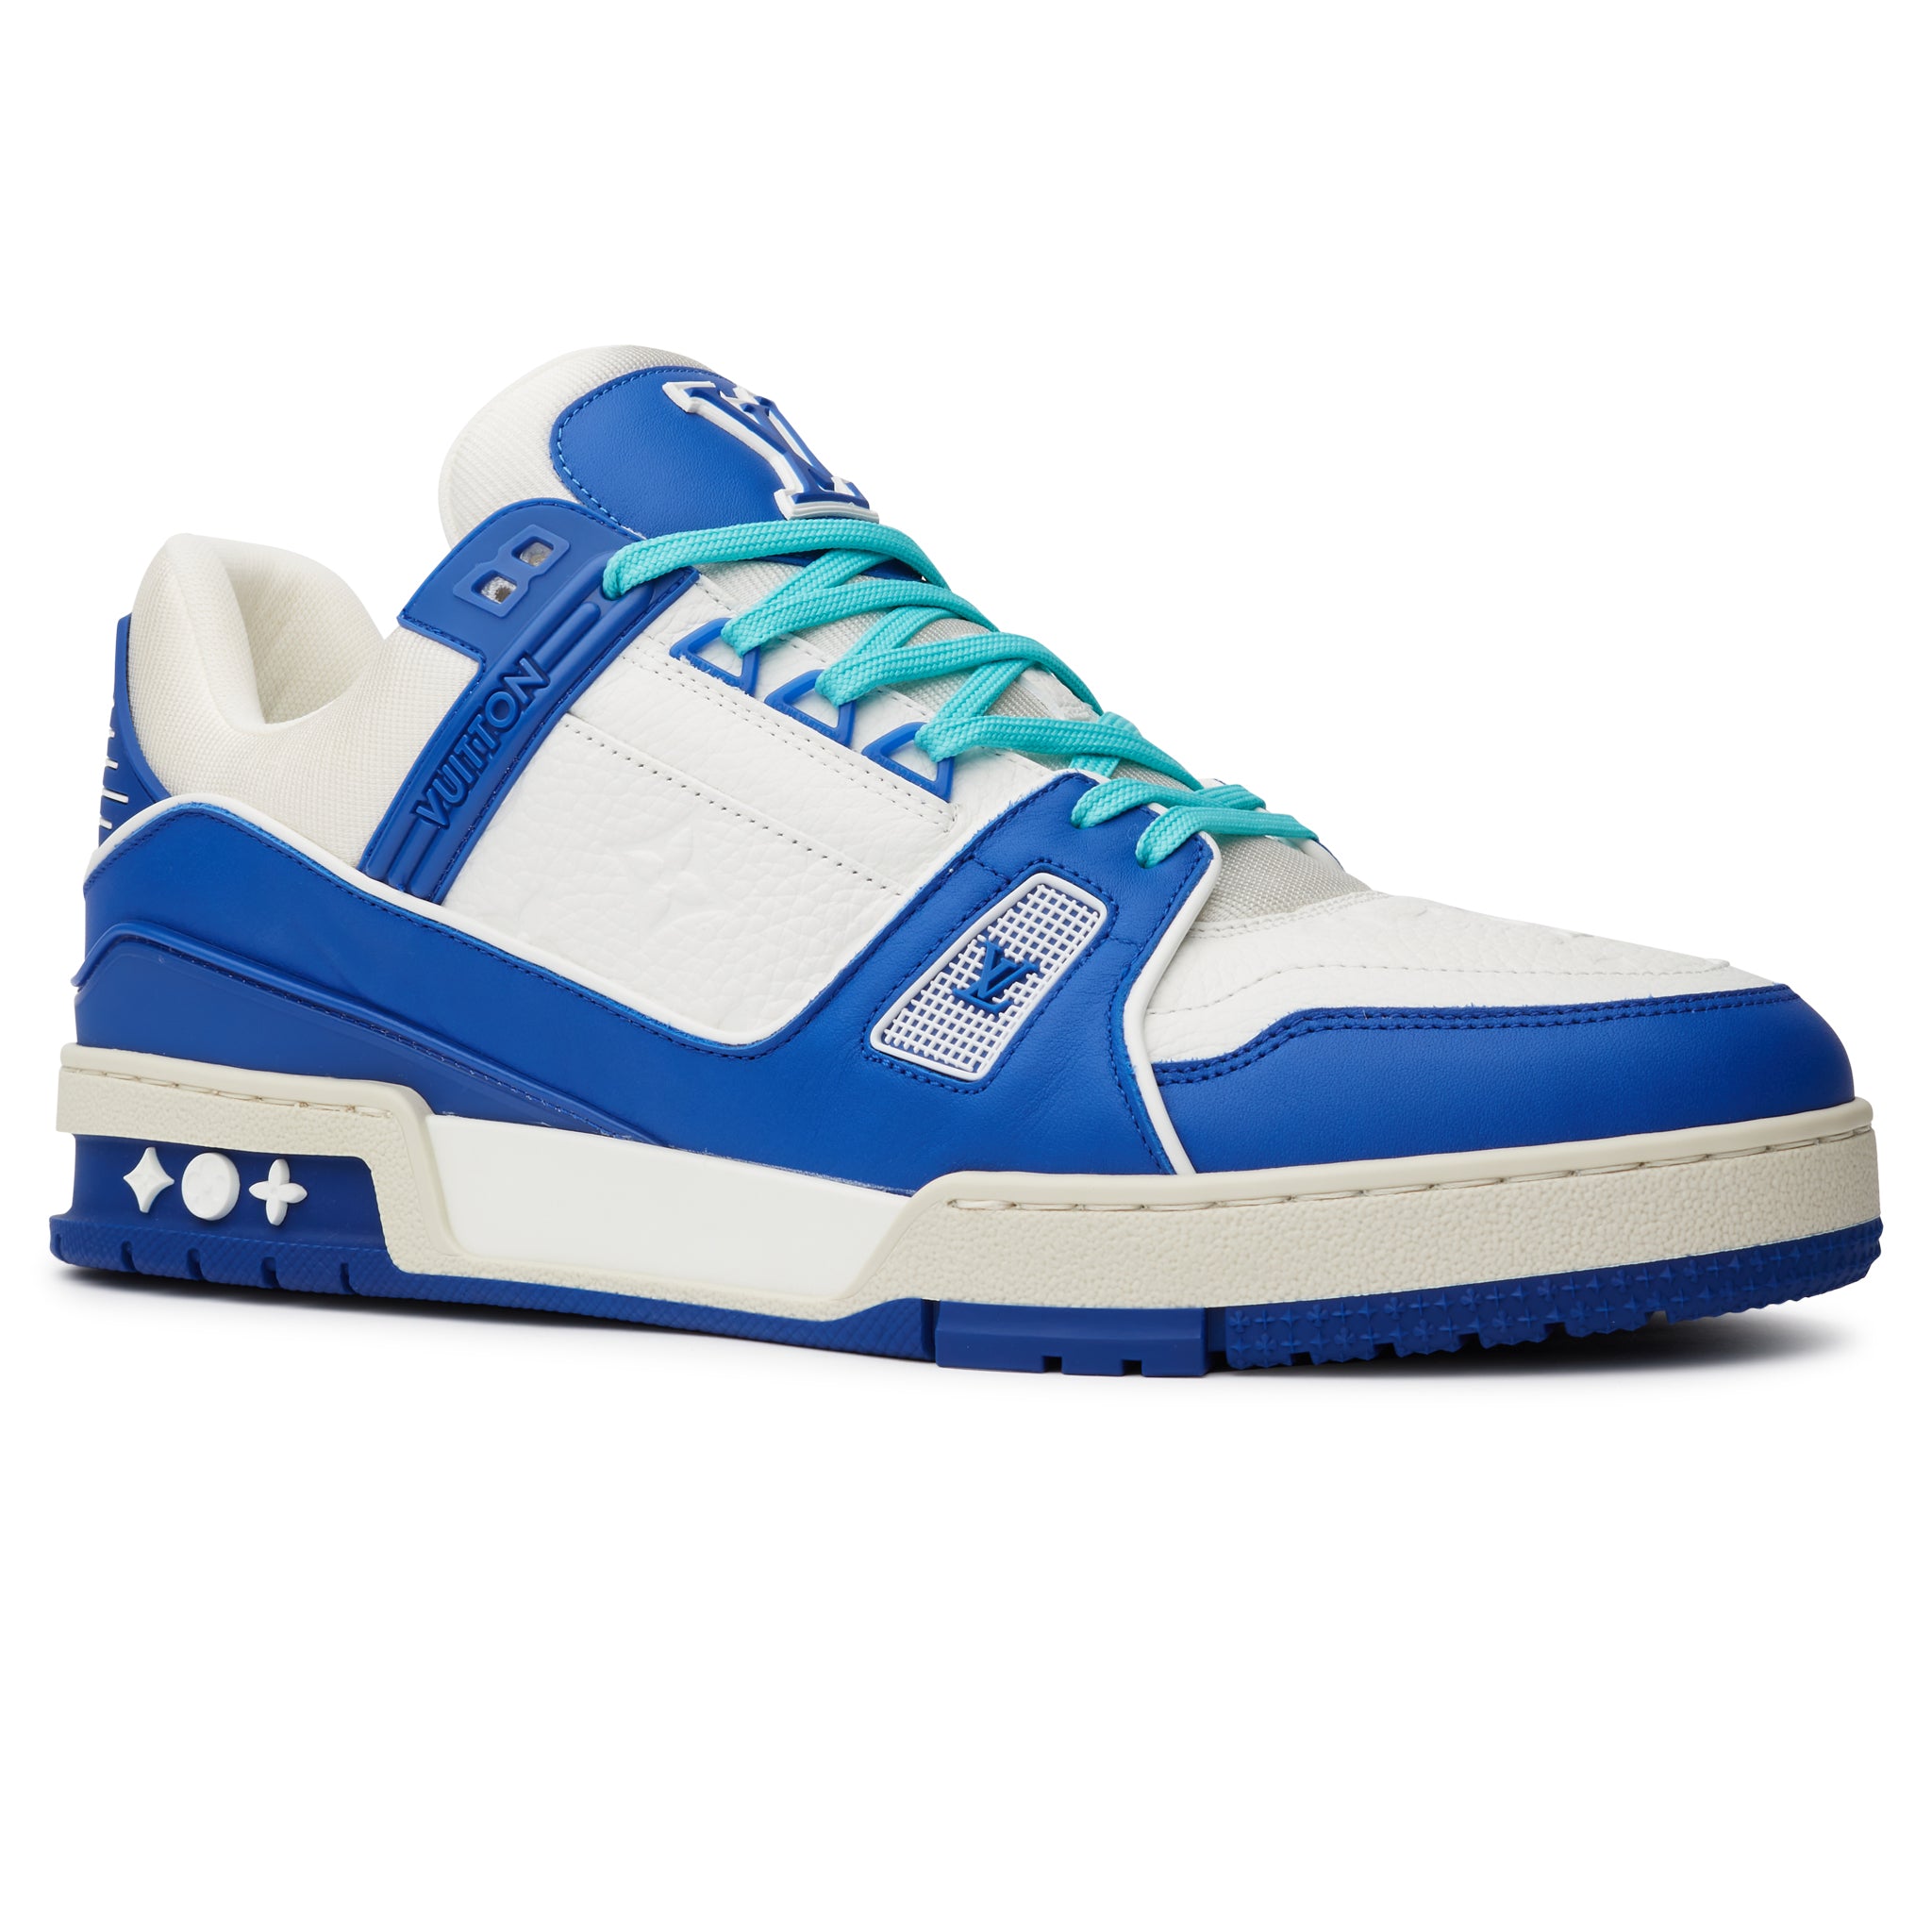 Image of Louis Vuitton LV Trainer White Blue Sneaker